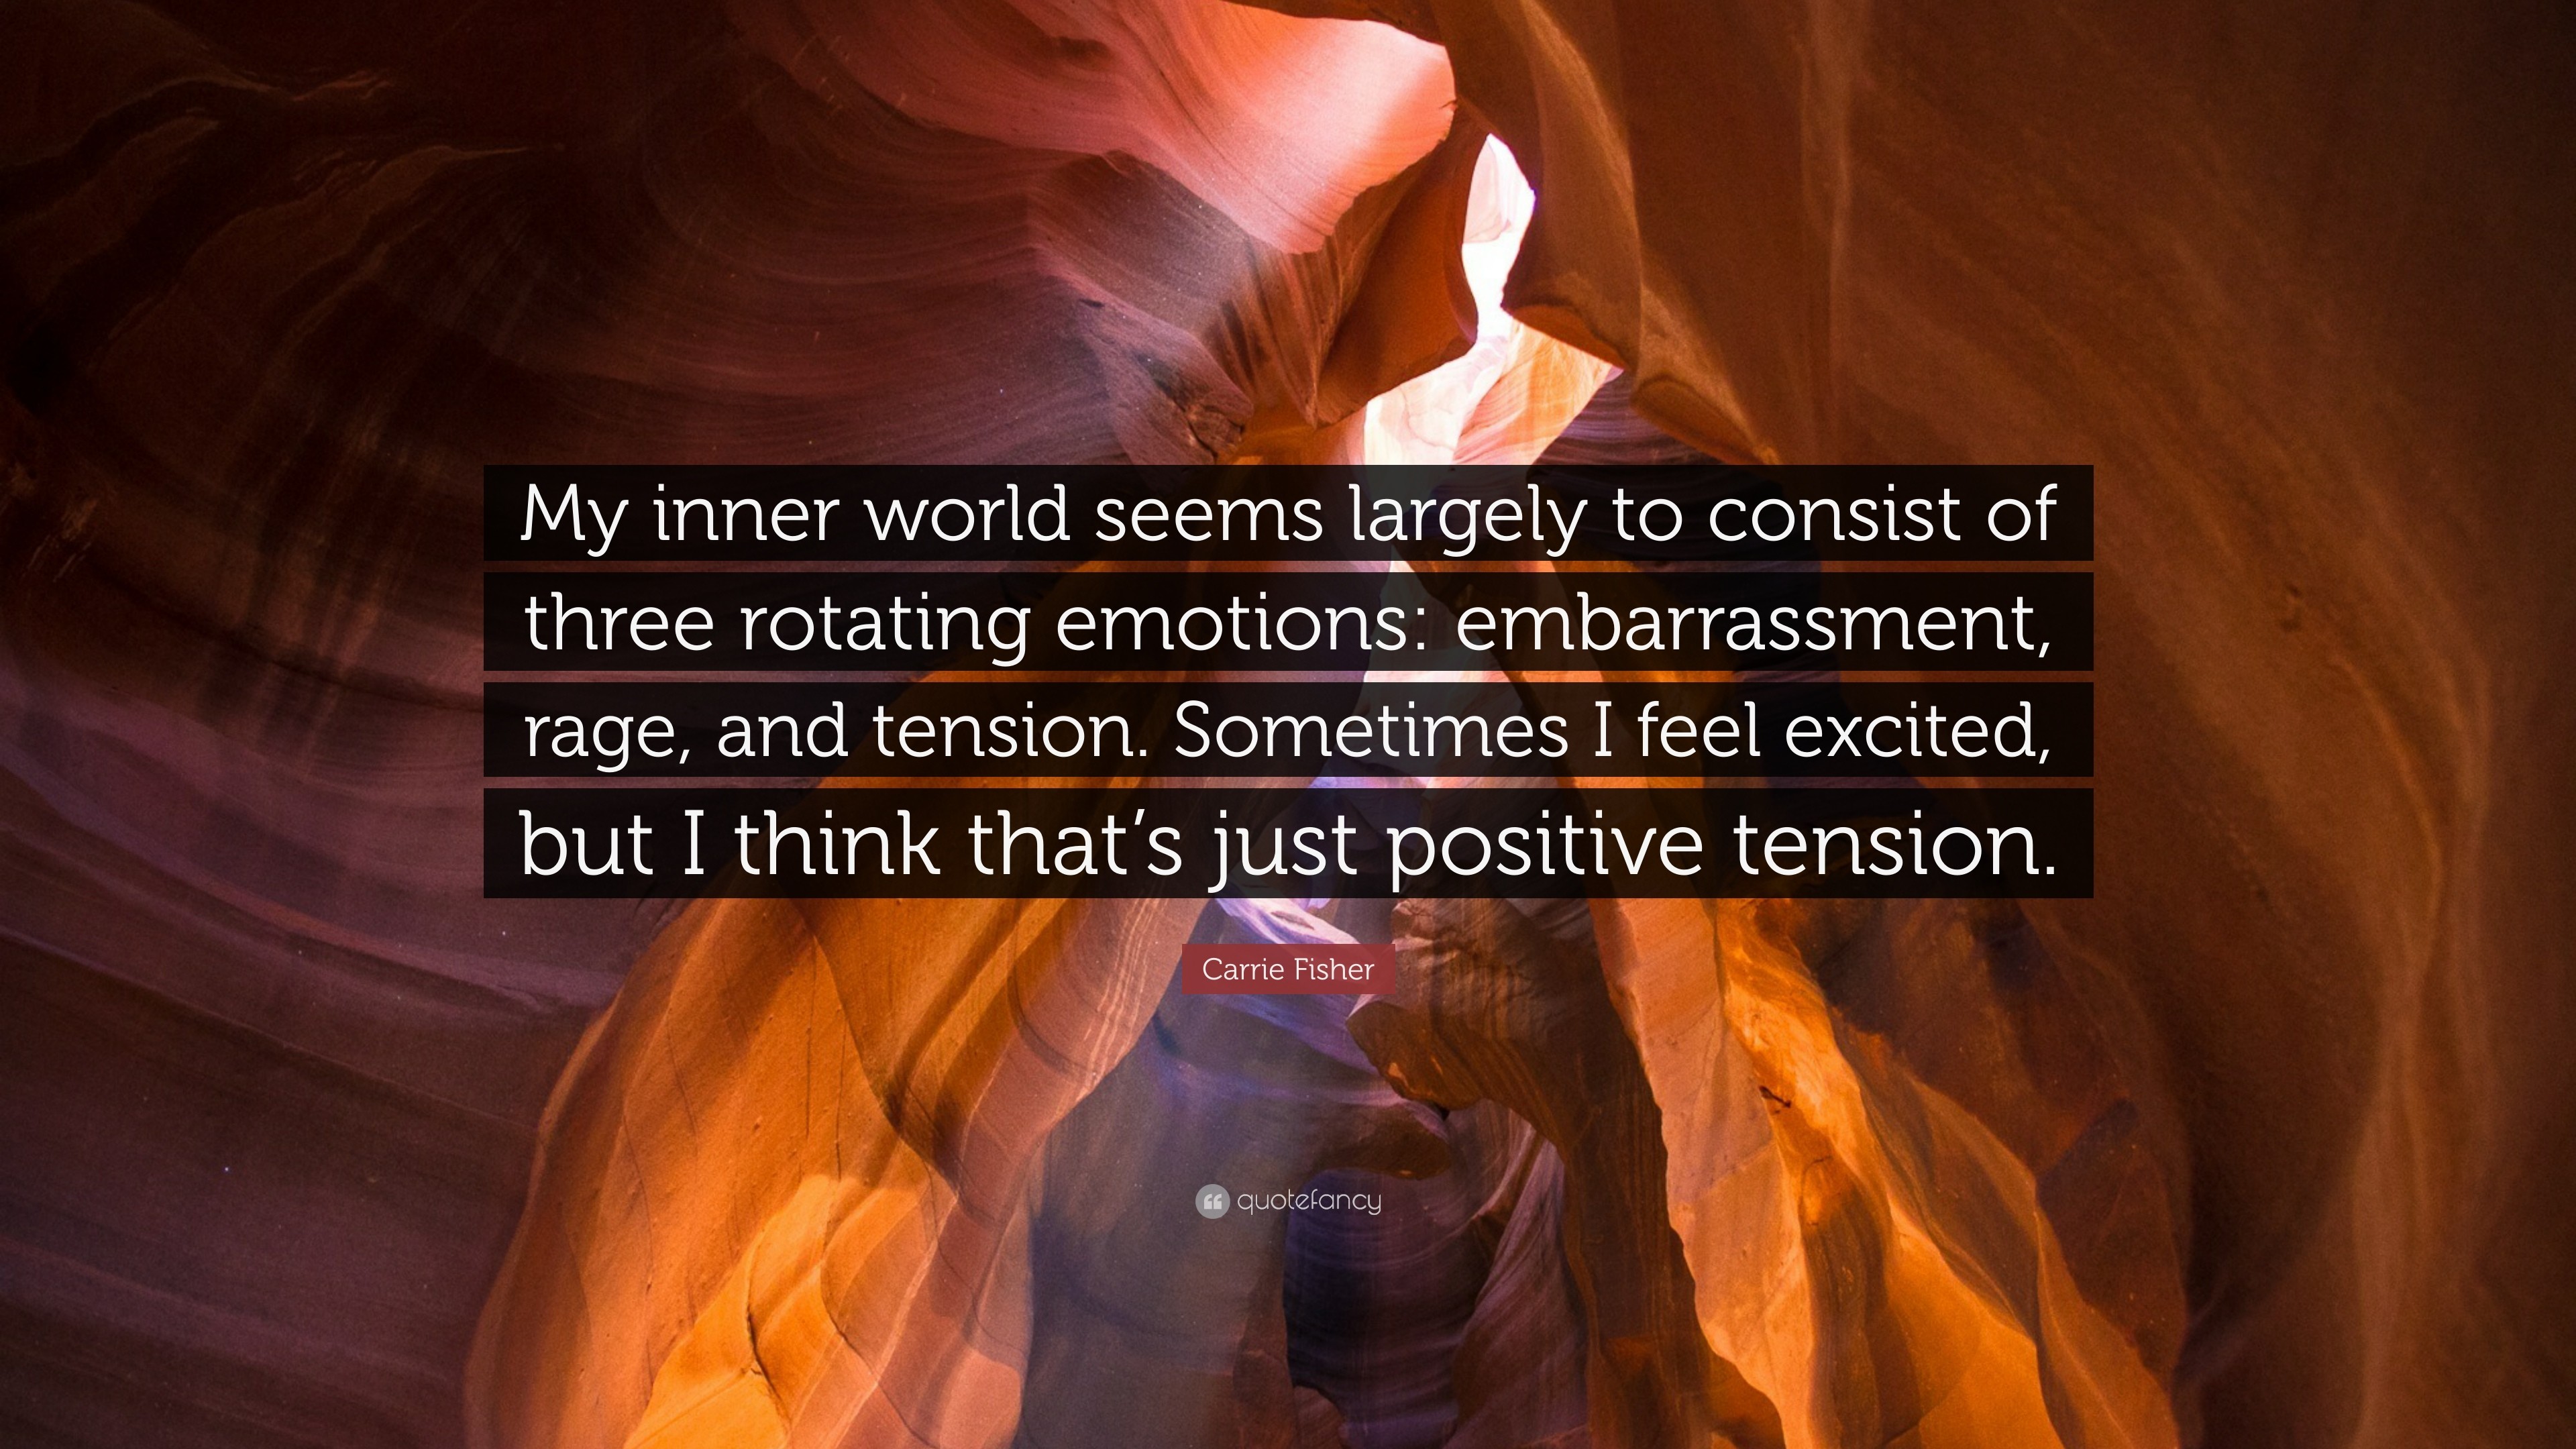 Carrie Fisher Quote My Inner World Seems Largely To Consist Of Three Rotating Emotions 3840x2160